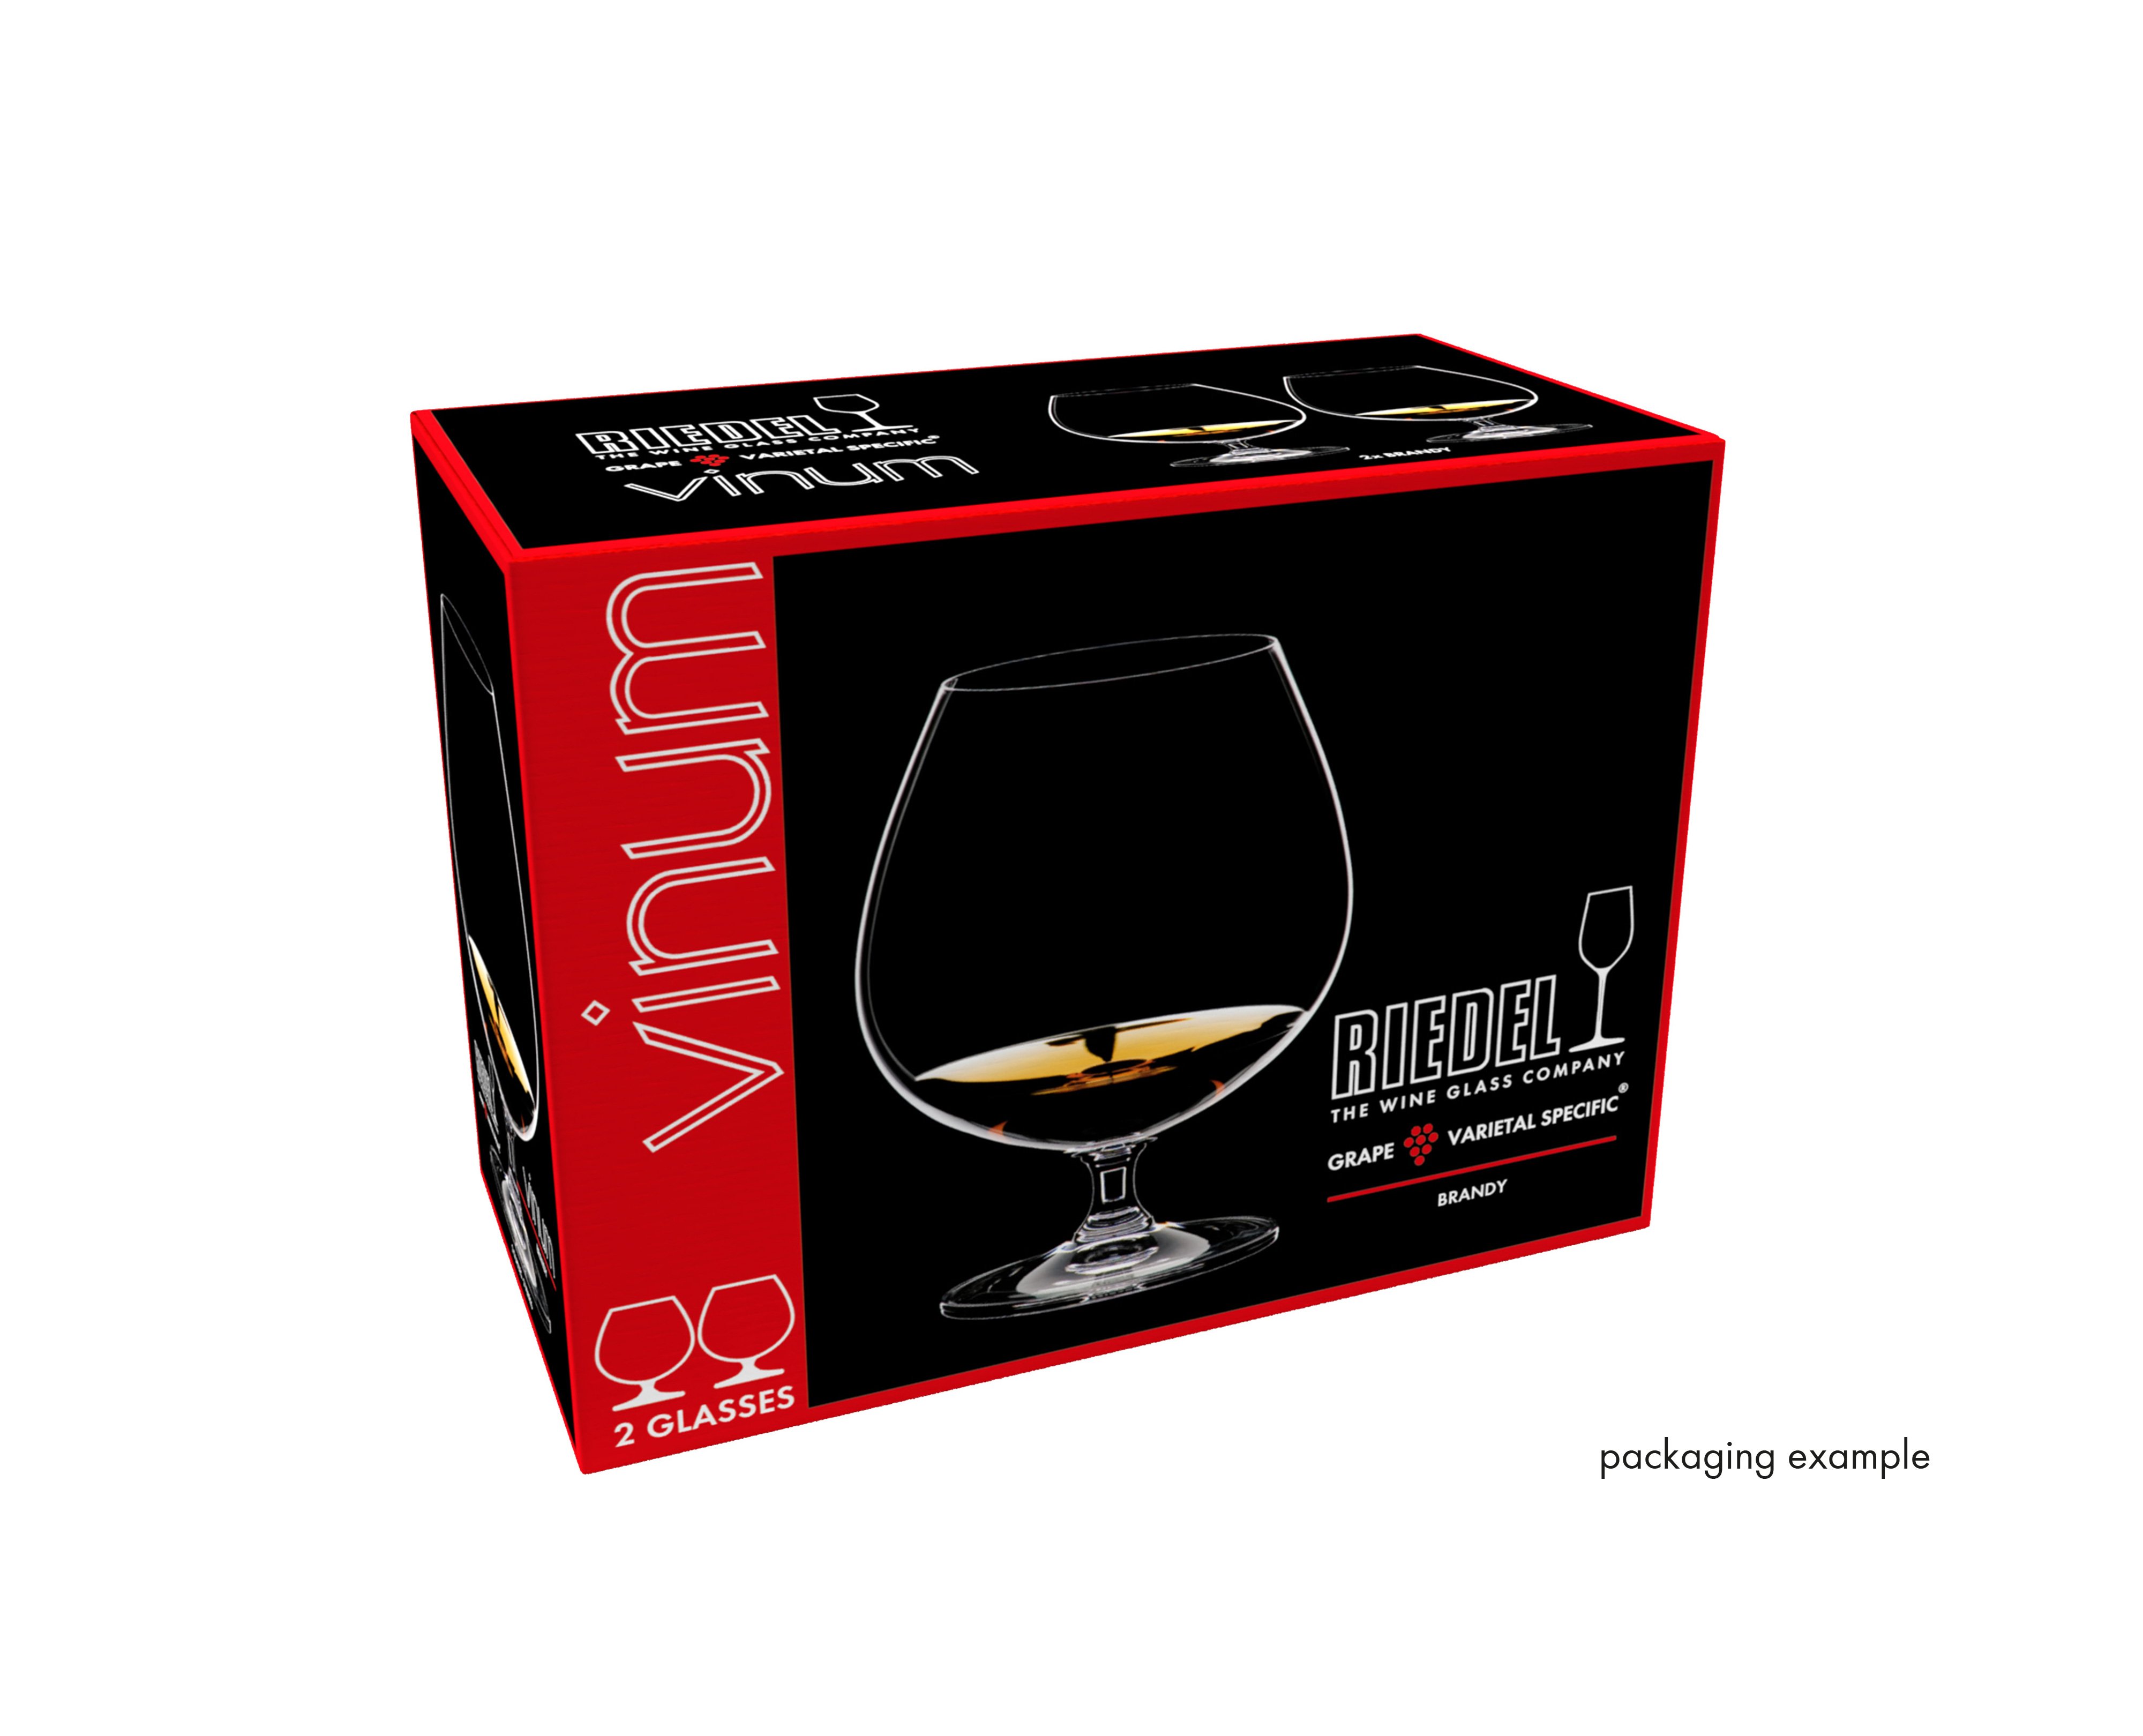 REME Brandy Crystal (Cumbria) Glasses Boxed – The REME Shop